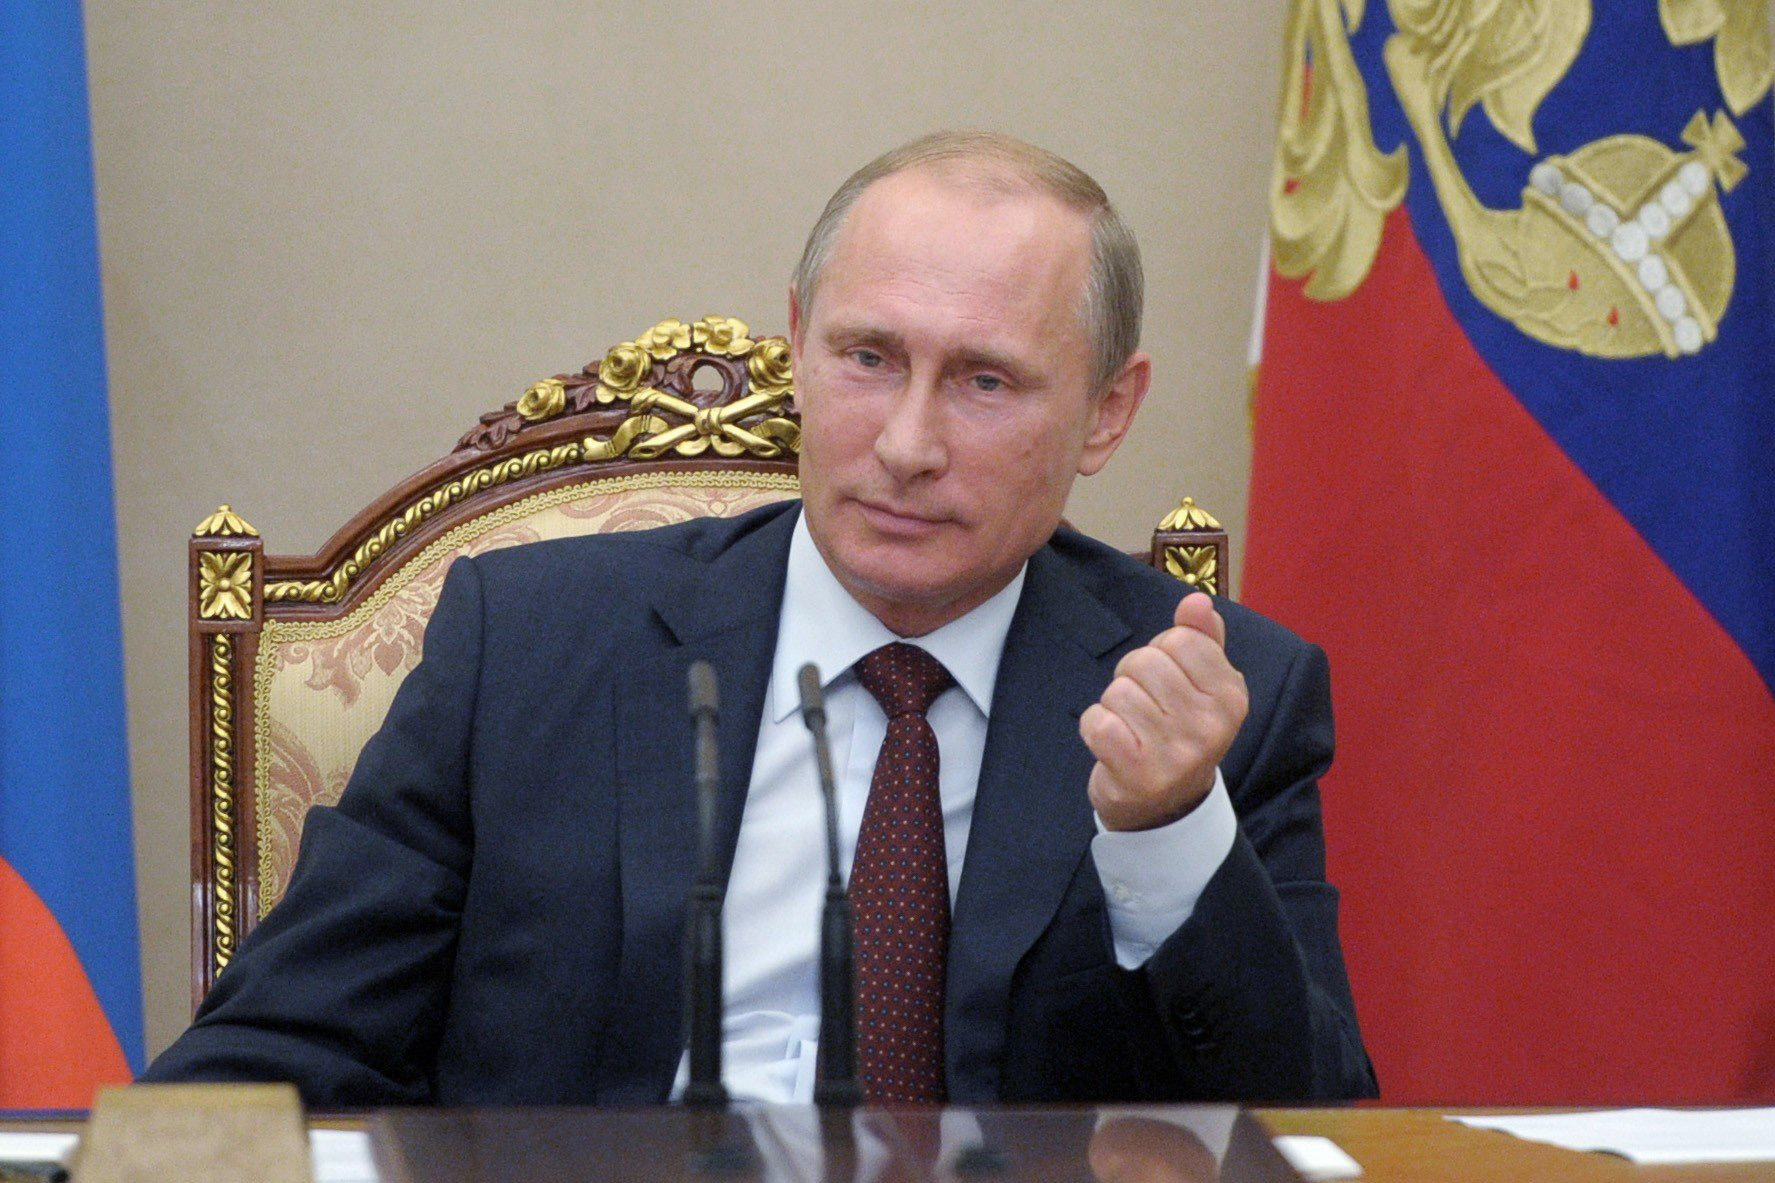 President Vladimir Putin during a government meeting in Moscow, Sept. 11, 2014.